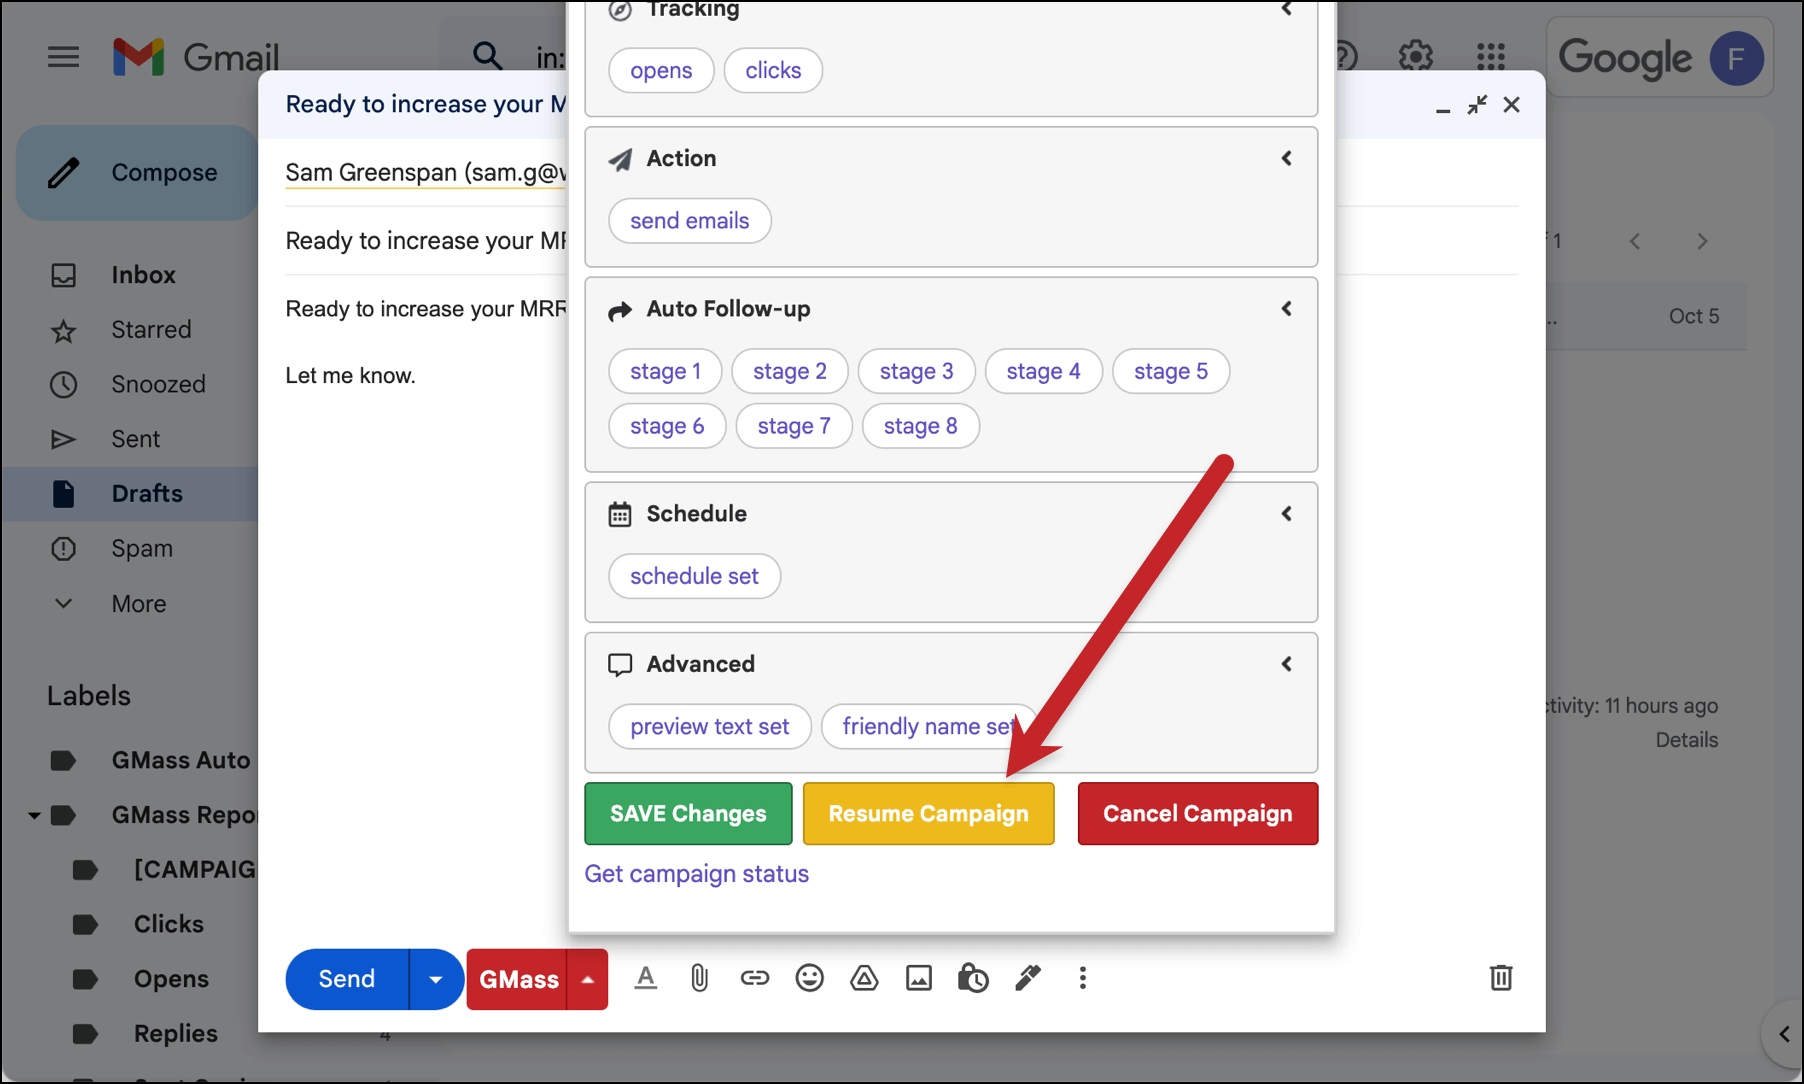 Resume a campaign in the settings box